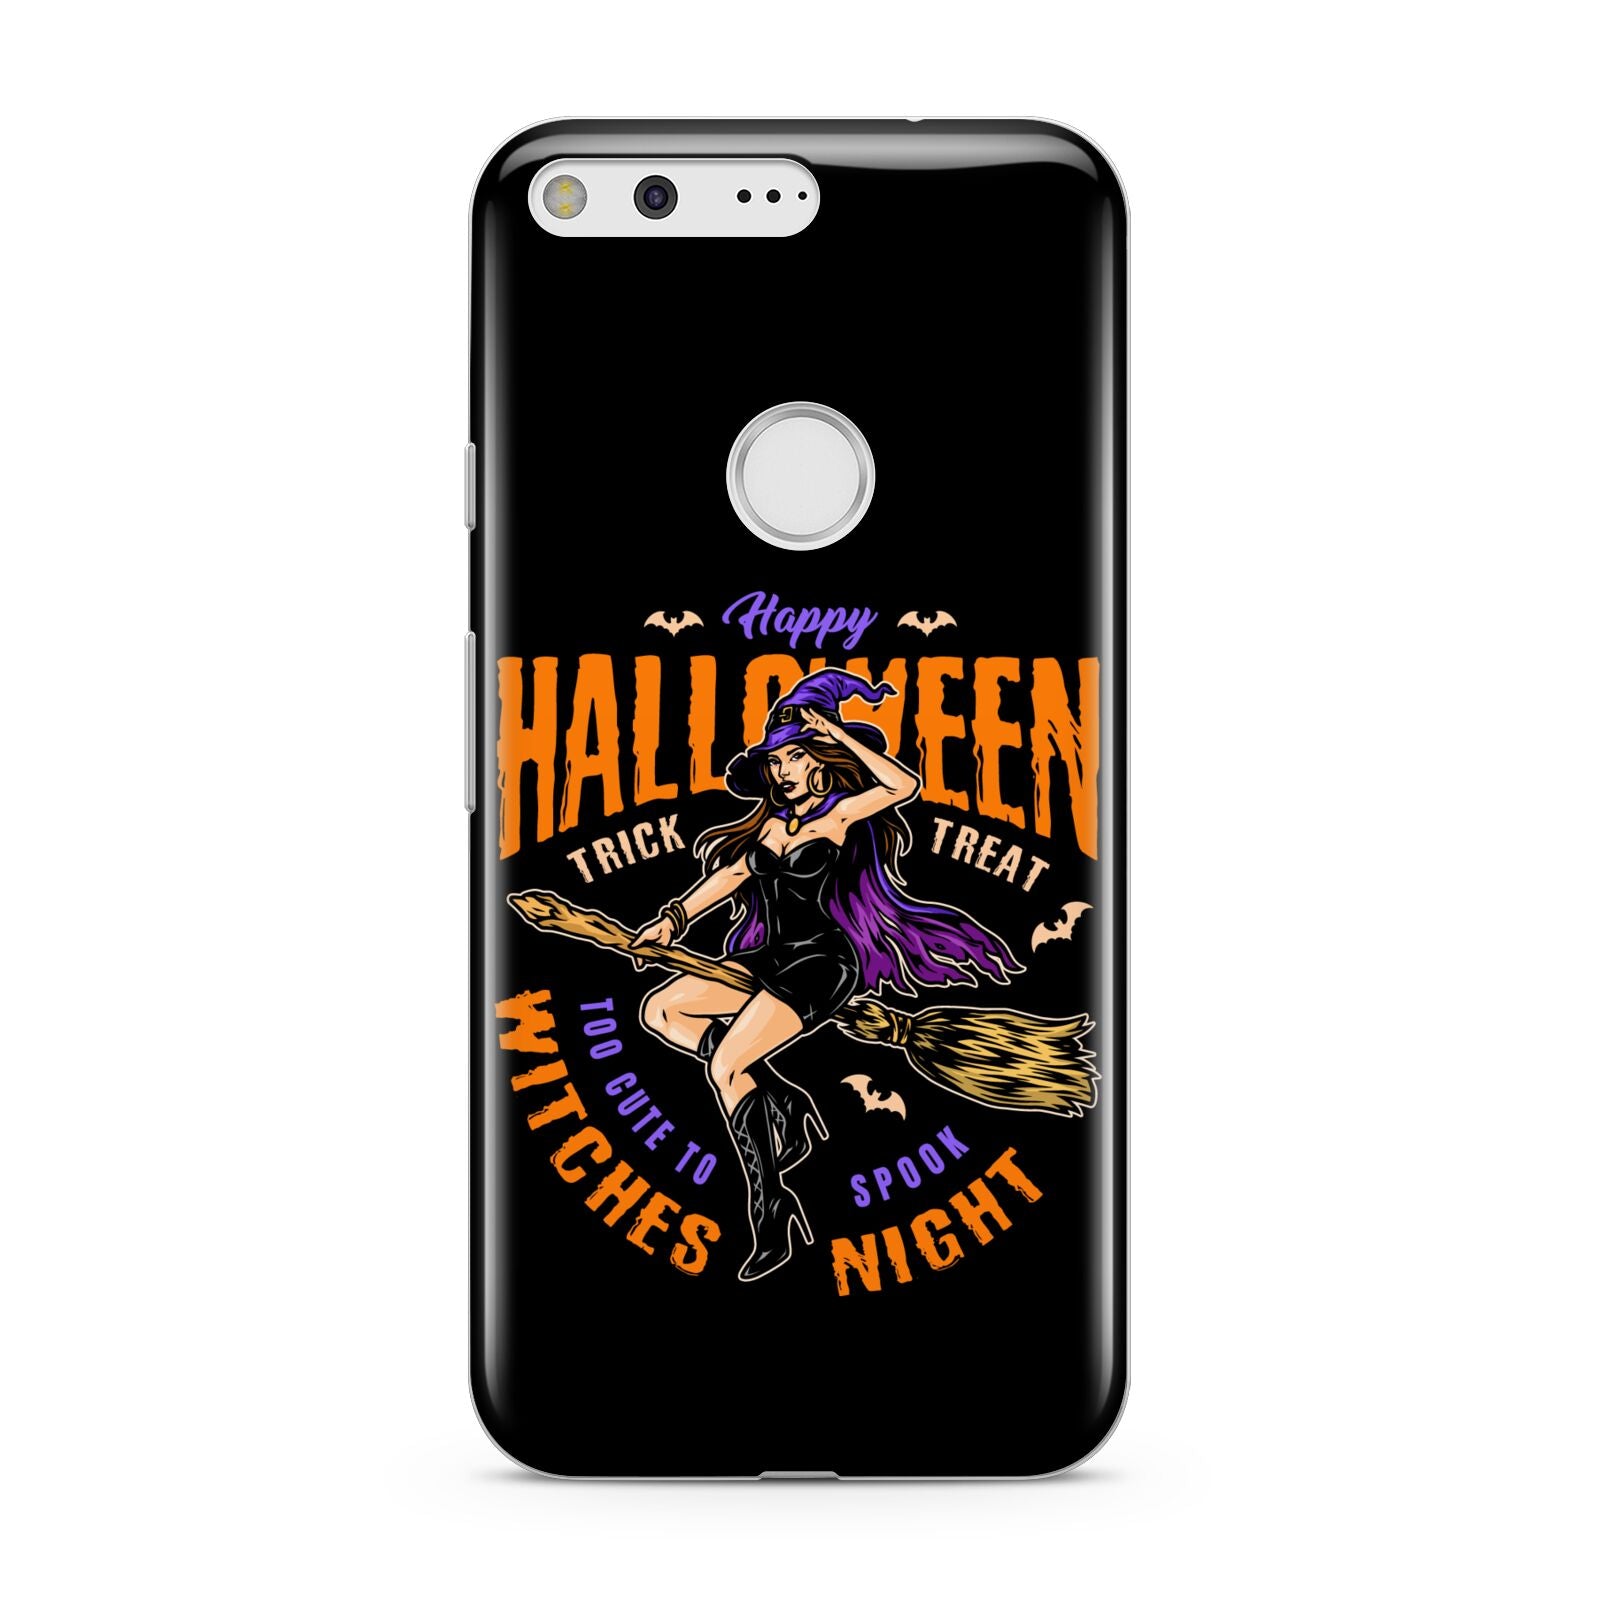 Witches Night Google Pixel Case